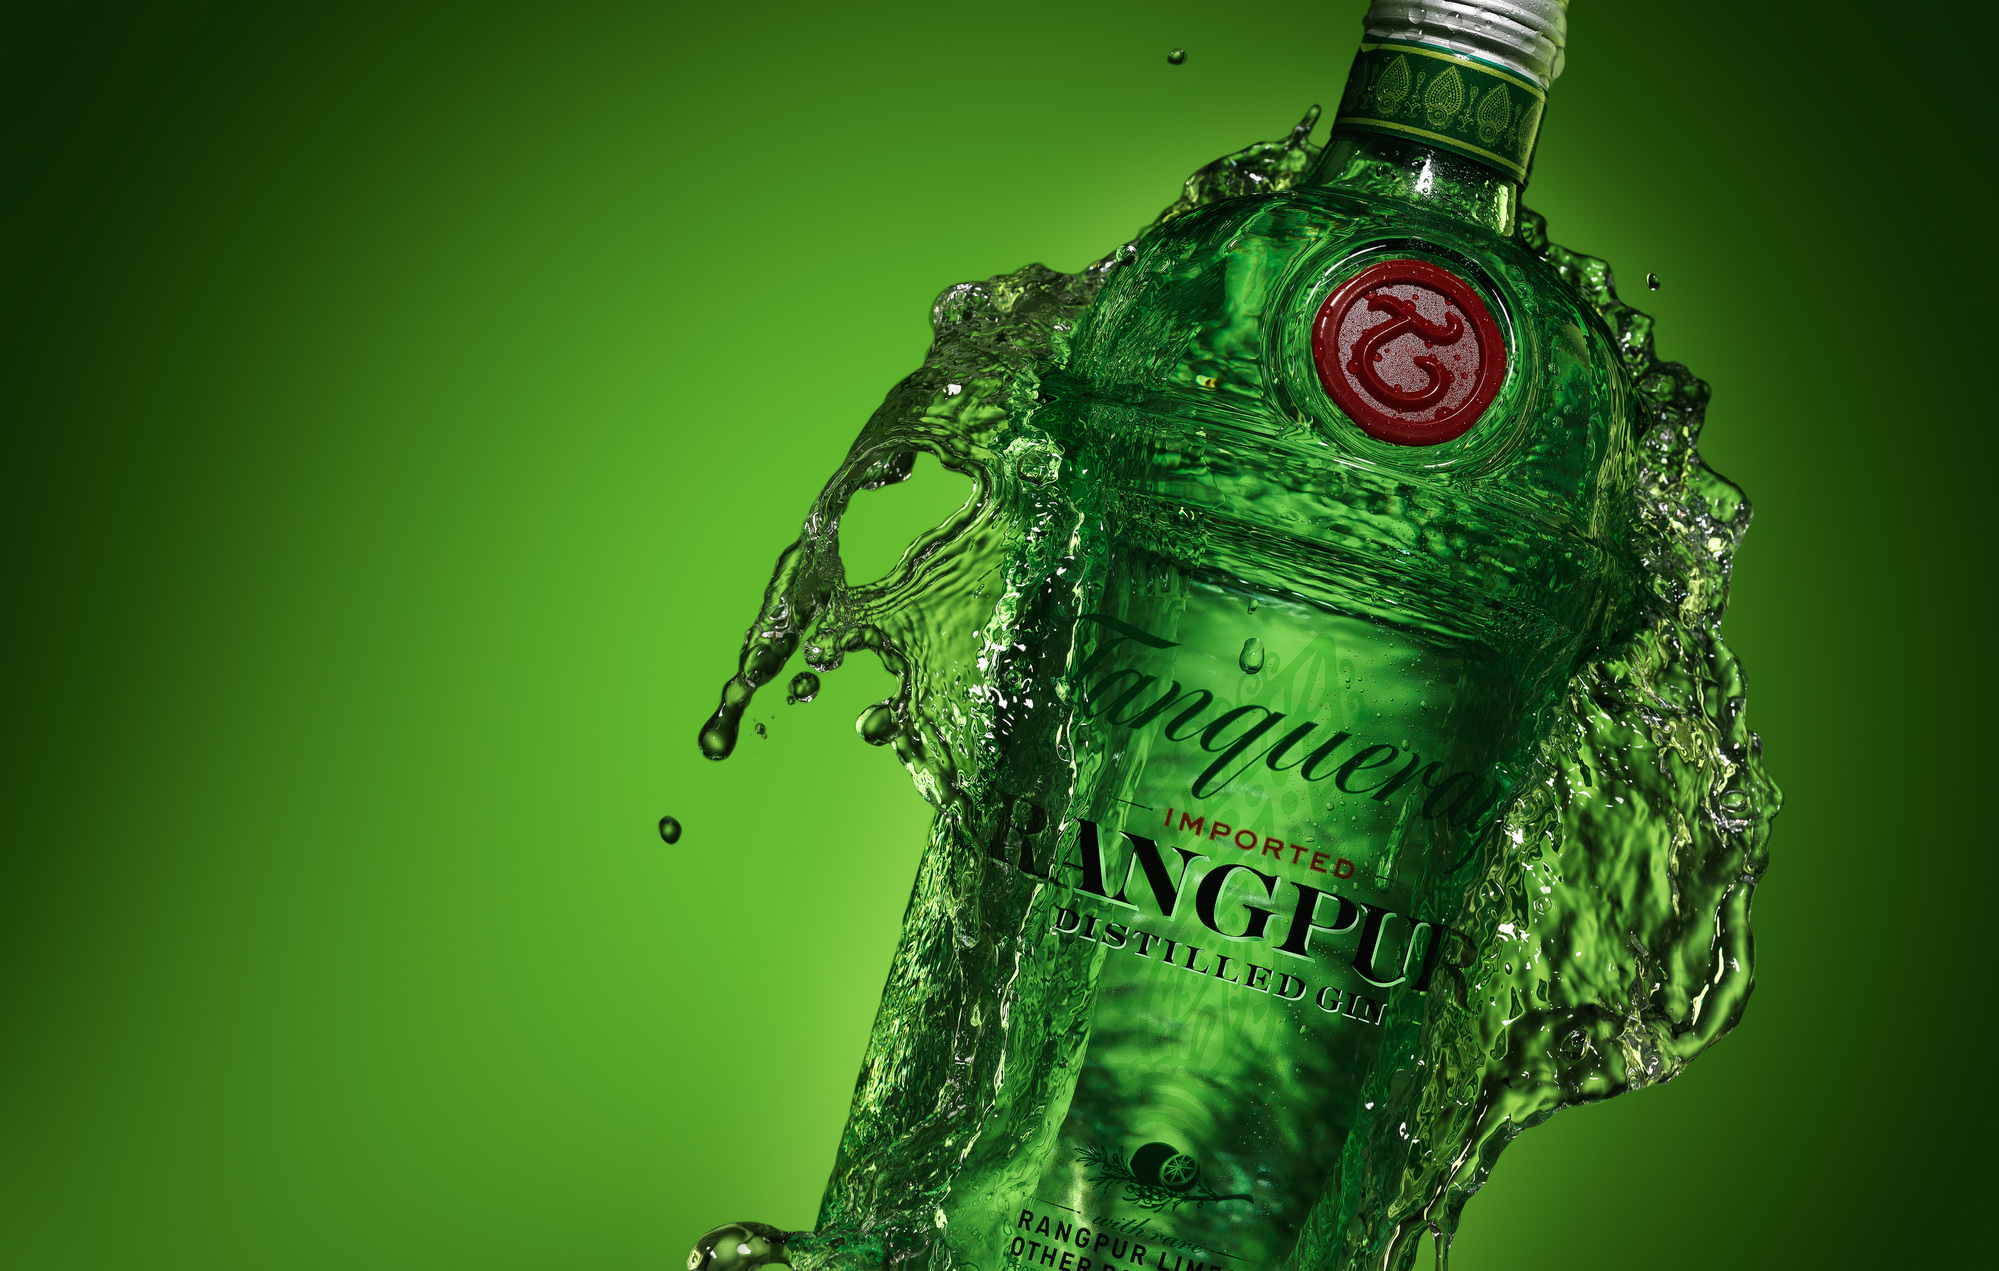 Tanqueray gin bottle splash photography by beverage and drinks photographer Timothy Hogan in Los Angeles